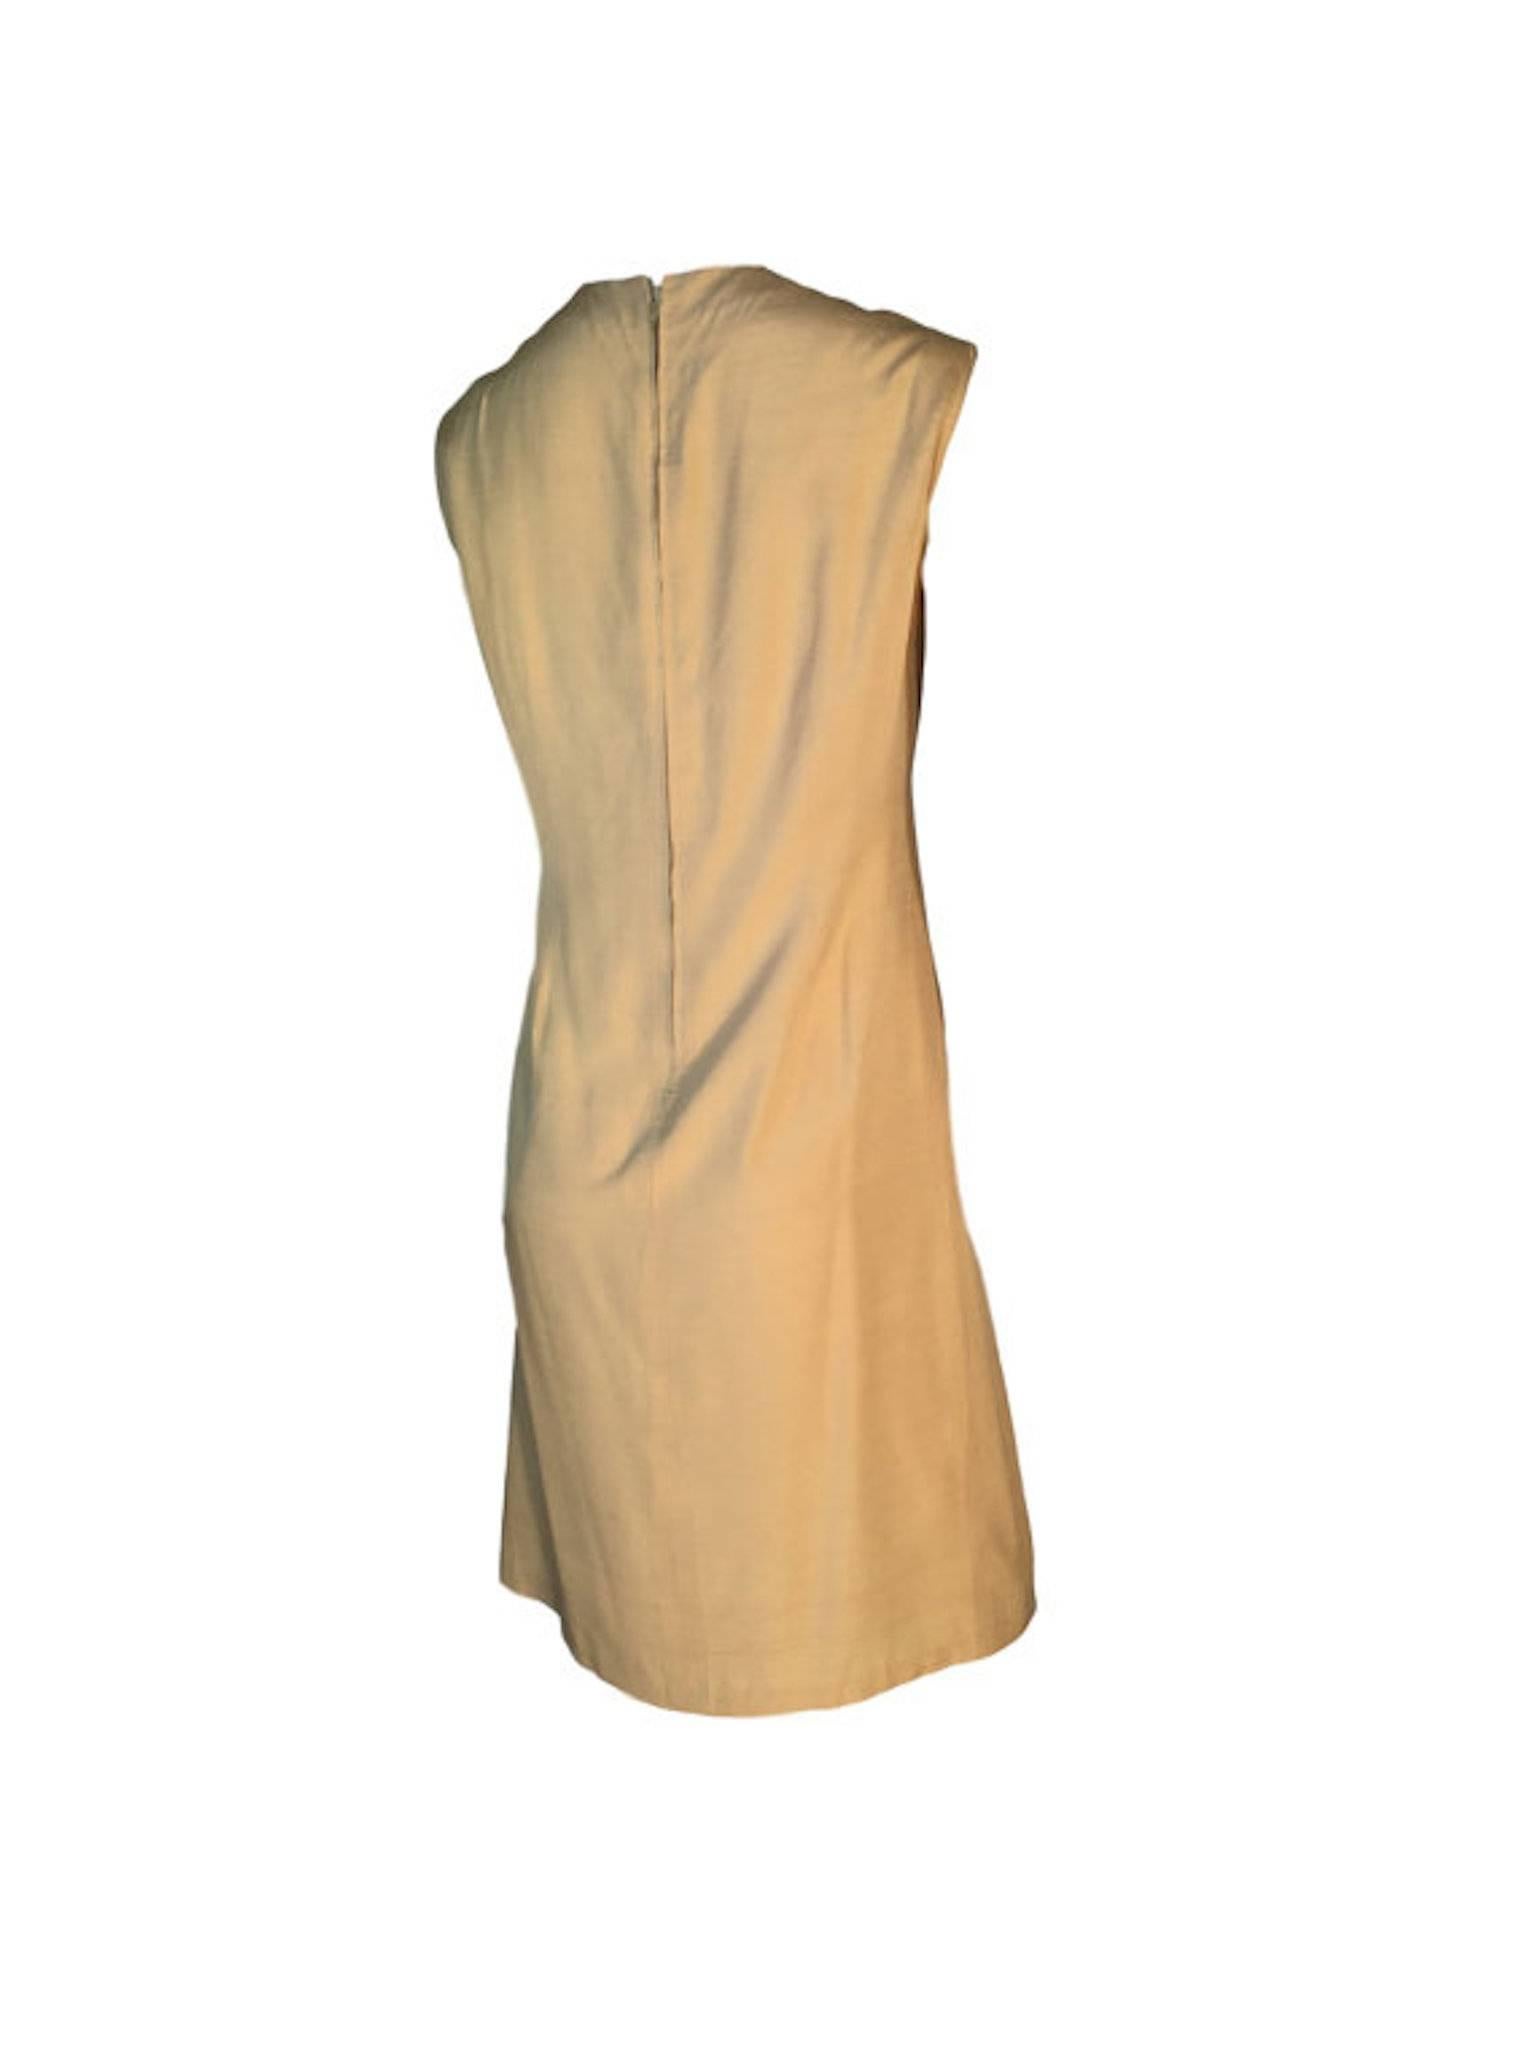 Pierre Cardin cream silk dress, 1960s shift dress with metal back zip entry, has panel detail at the front.

Size UK 14 measures 20 inches across bust, 16.5 inches across waist and 42 inches length. 